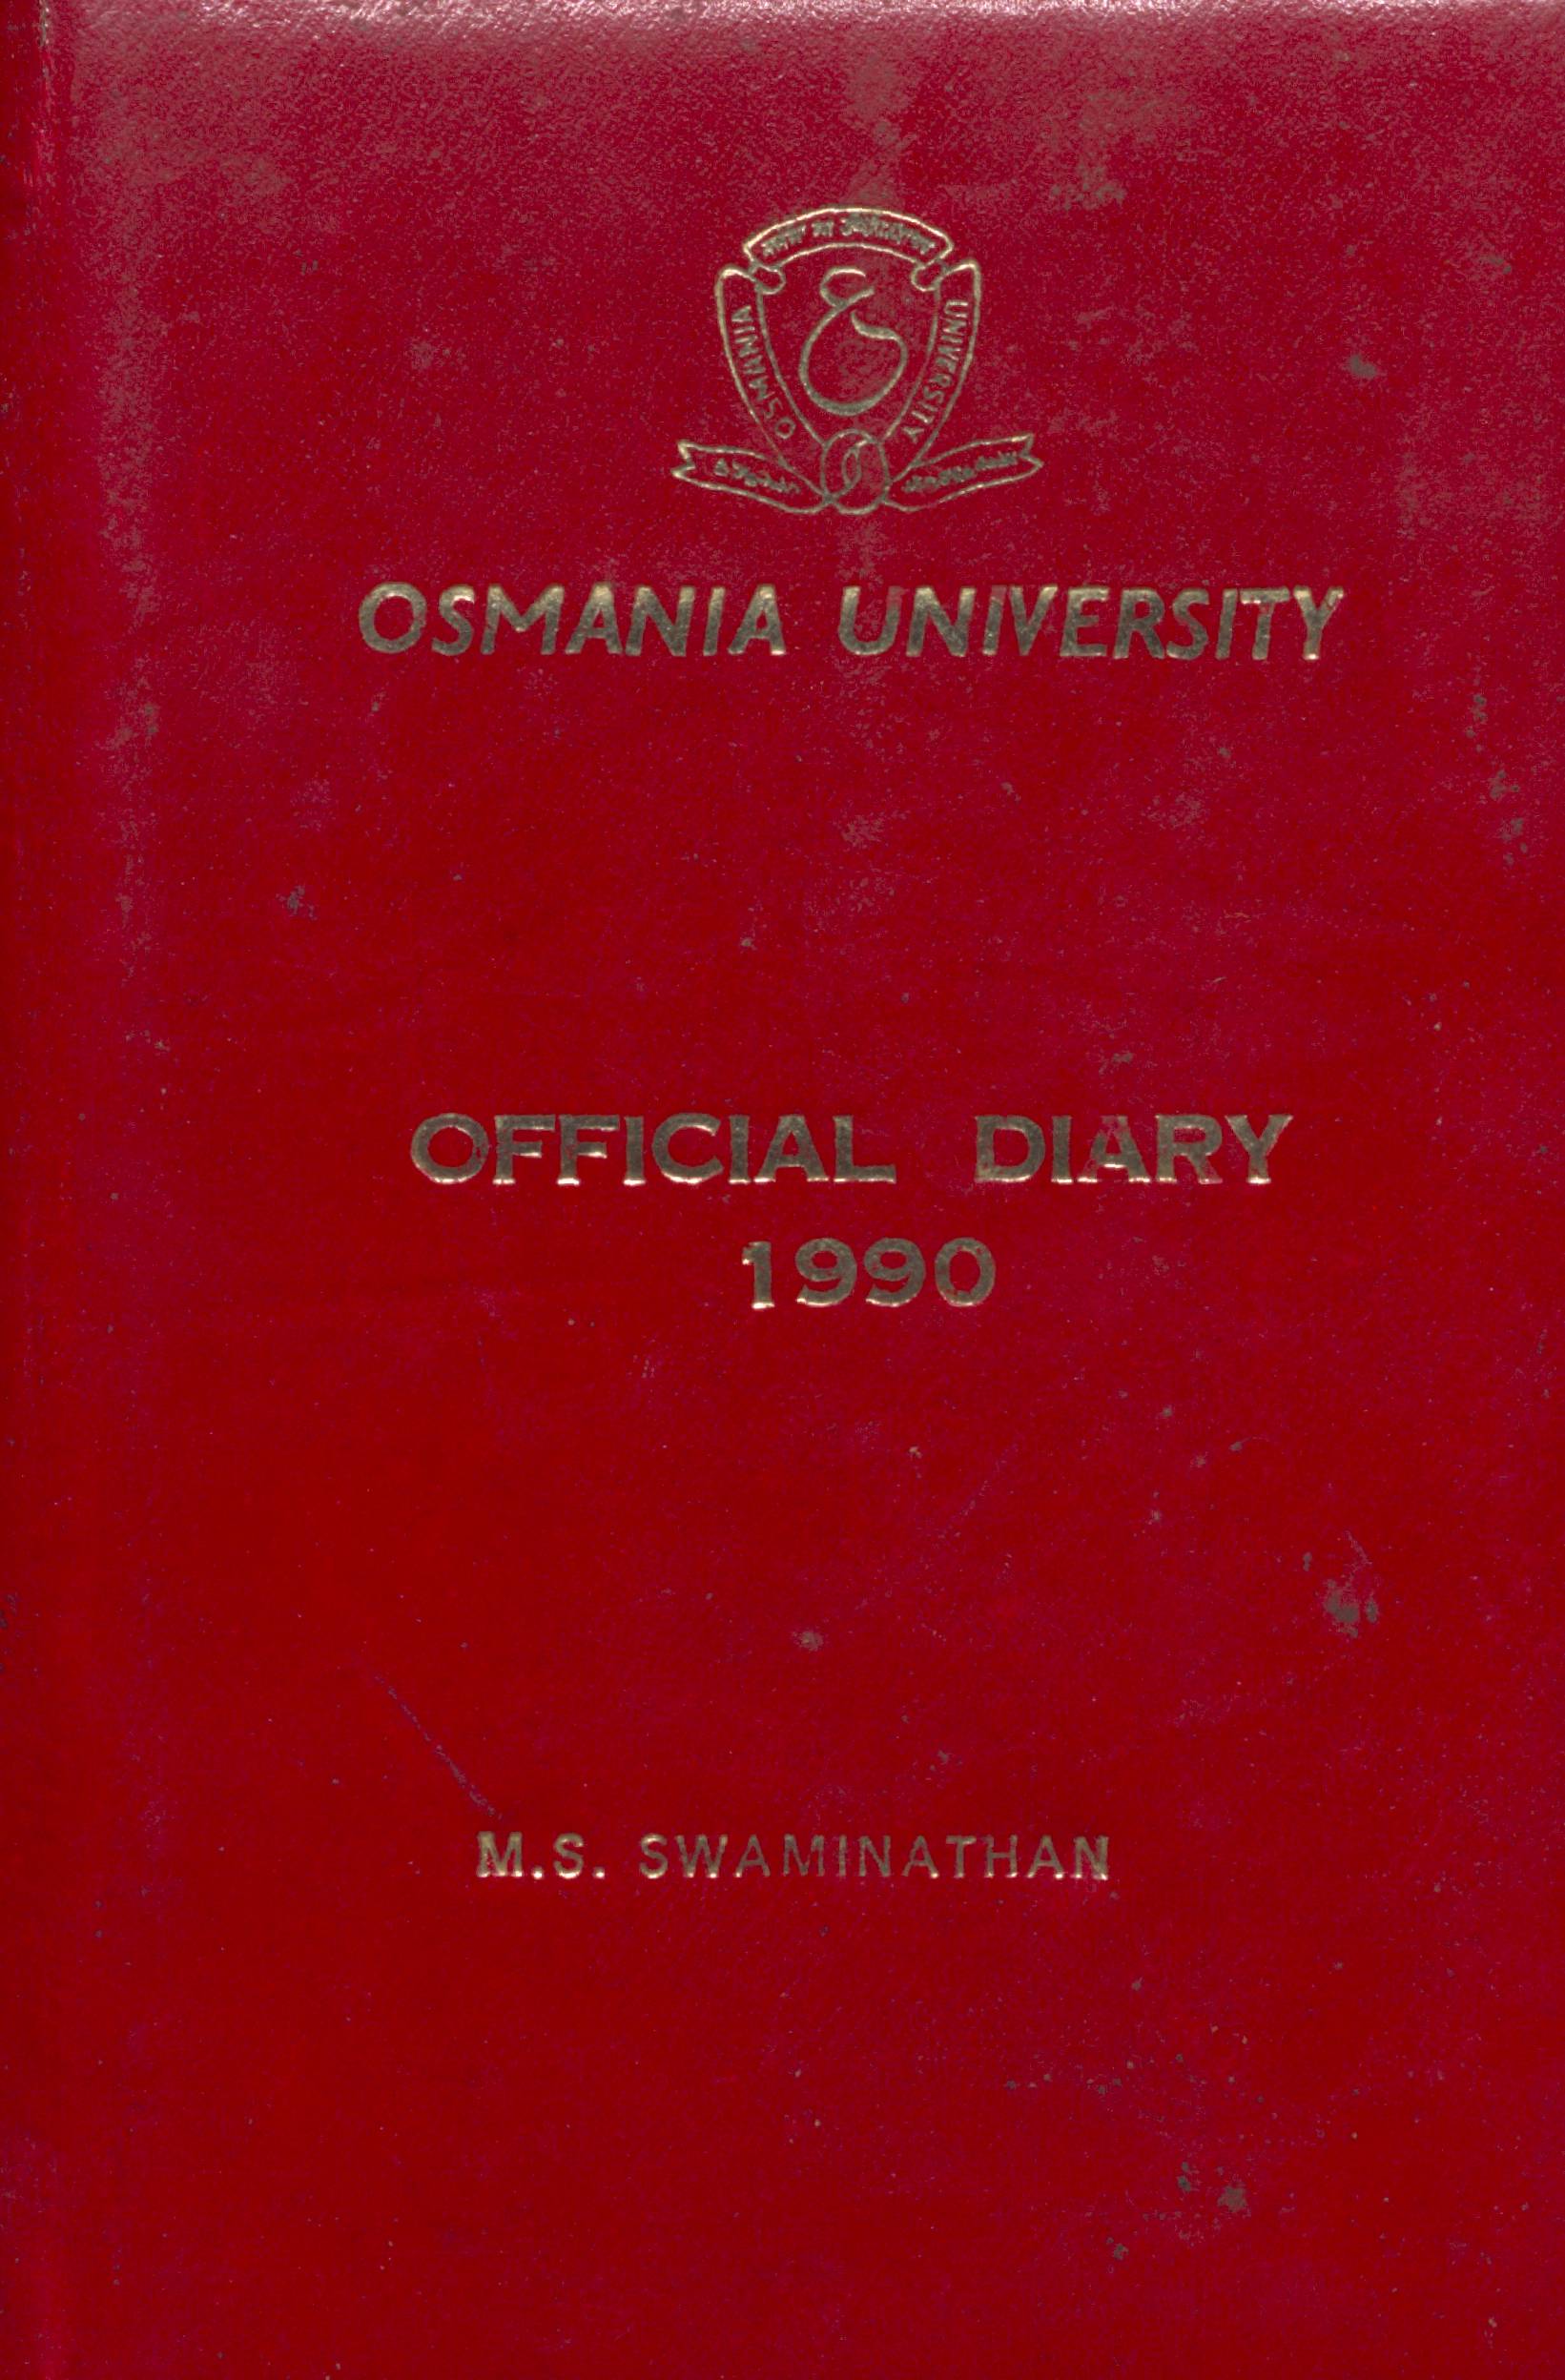 Research Diary -- 1990